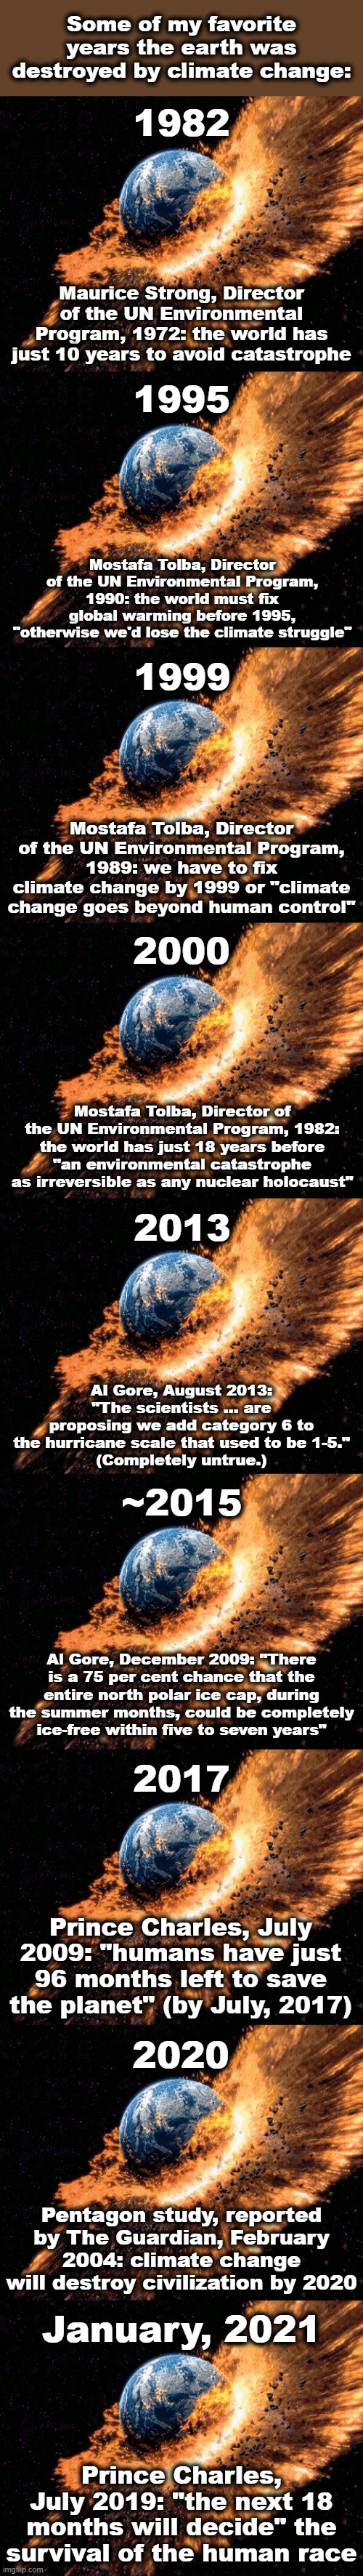 Some of my favorite years the earth was destroyed by climate change:; 1982; Maurice Strong, Director of the UN Environmental Program, 1972: the world has just 10 years to avoid catastrophe; 1995; Mostafa Tolba, Director of the UN Environmental Program, 1990: the world must fix global warming before 1995, "otherwise we'd lose the climate struggle"; 1999; Mostafa Tolba, Director of the UN Environmental Program, 1989: we have to fix climate change by 1999 or "climate change goes beyond human control"; 2000; Mostafa Tolba, Director of the UN Environmental Program, 1982: the world has just 18 years before "an environmental catastrophe as irreversible as any nuclear holocaust"; 2013; Al Gore, August 2013: "The scientists ... are proposing we add category 6 to the hurricane scale that used to be 1-5."
(Completely untrue.); ~2015; Al Gore, December 2009: "There is a 75 per cent chance that the entire north polar ice cap, during the summer months, could be completely ice-free within five to seven years"; 2017; Prince Charles, July 2009: "humans have just 96 months left to save the planet" (by July, 2017); 2020; Pentagon study, reported by The Guardian, February 2004: climate change will destroy civilization by 2020; January, 2021; Prince Charles, July 2019: "the next 18 months will decide" the survival of the human race | image tagged in memes,climate change,global warming,destruction of earth,favorite years,hysteria | made w/ Imgflip meme maker